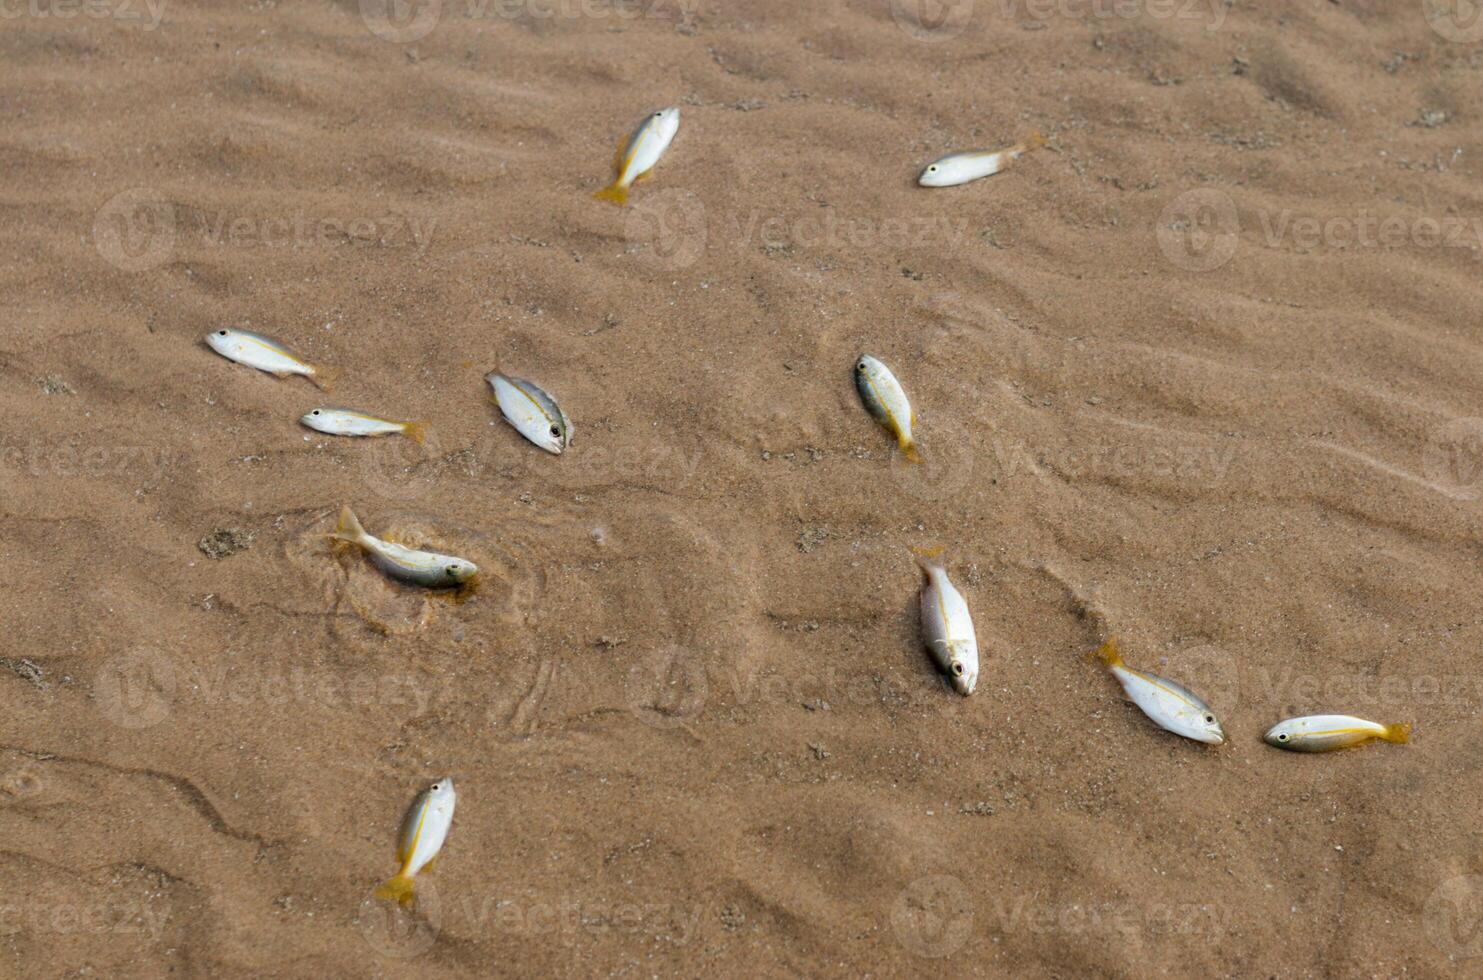 Small fish die due to tuba poisoning or Derris plants. environmental problems photo